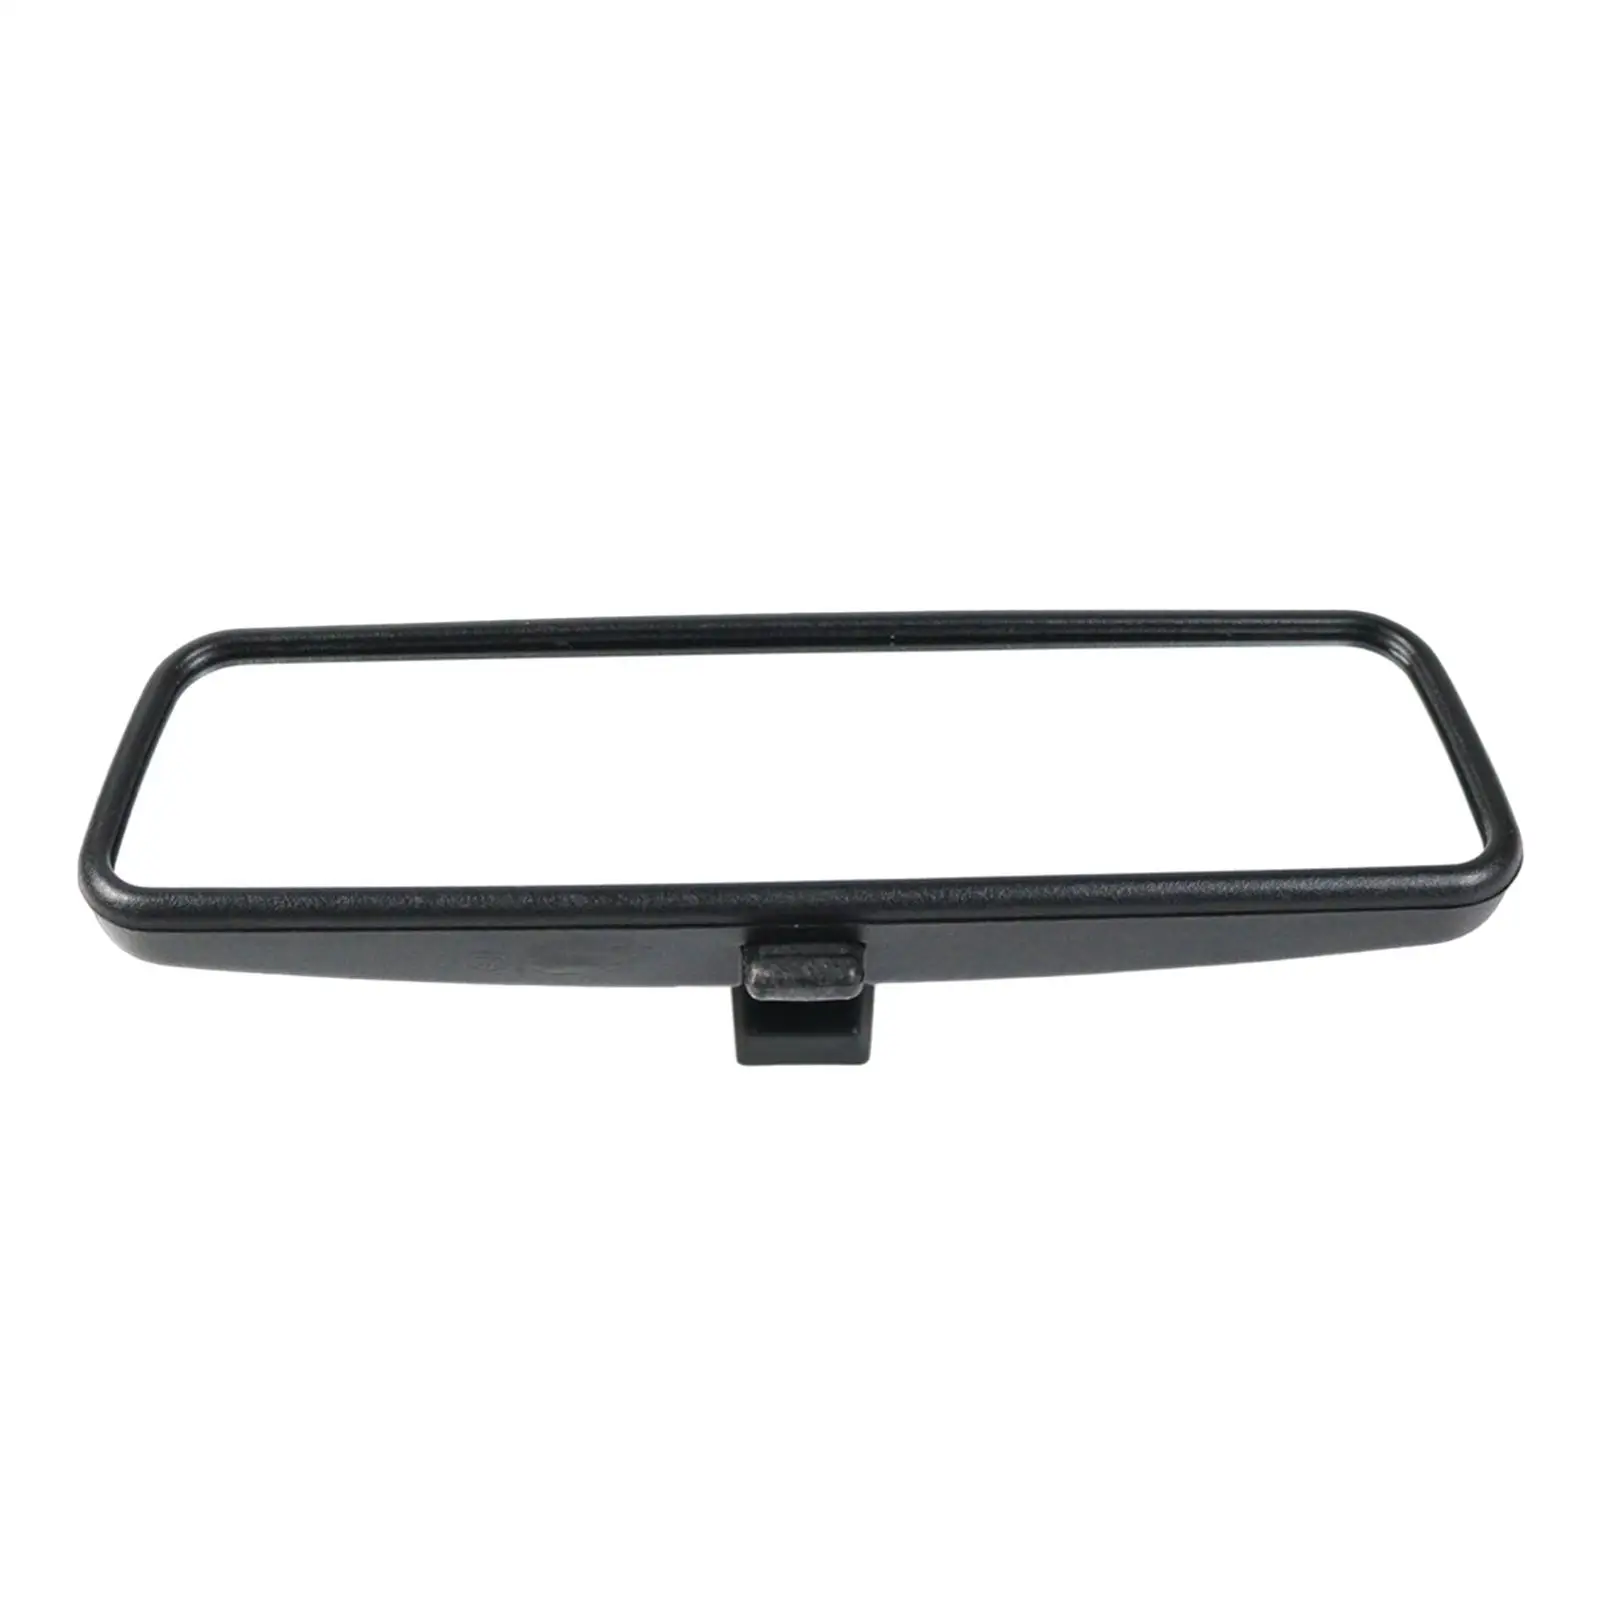 Interior Rear View Mirror 814842 Rearview Mirror for Renault Replaces Auto Accessories Automotive High Performance